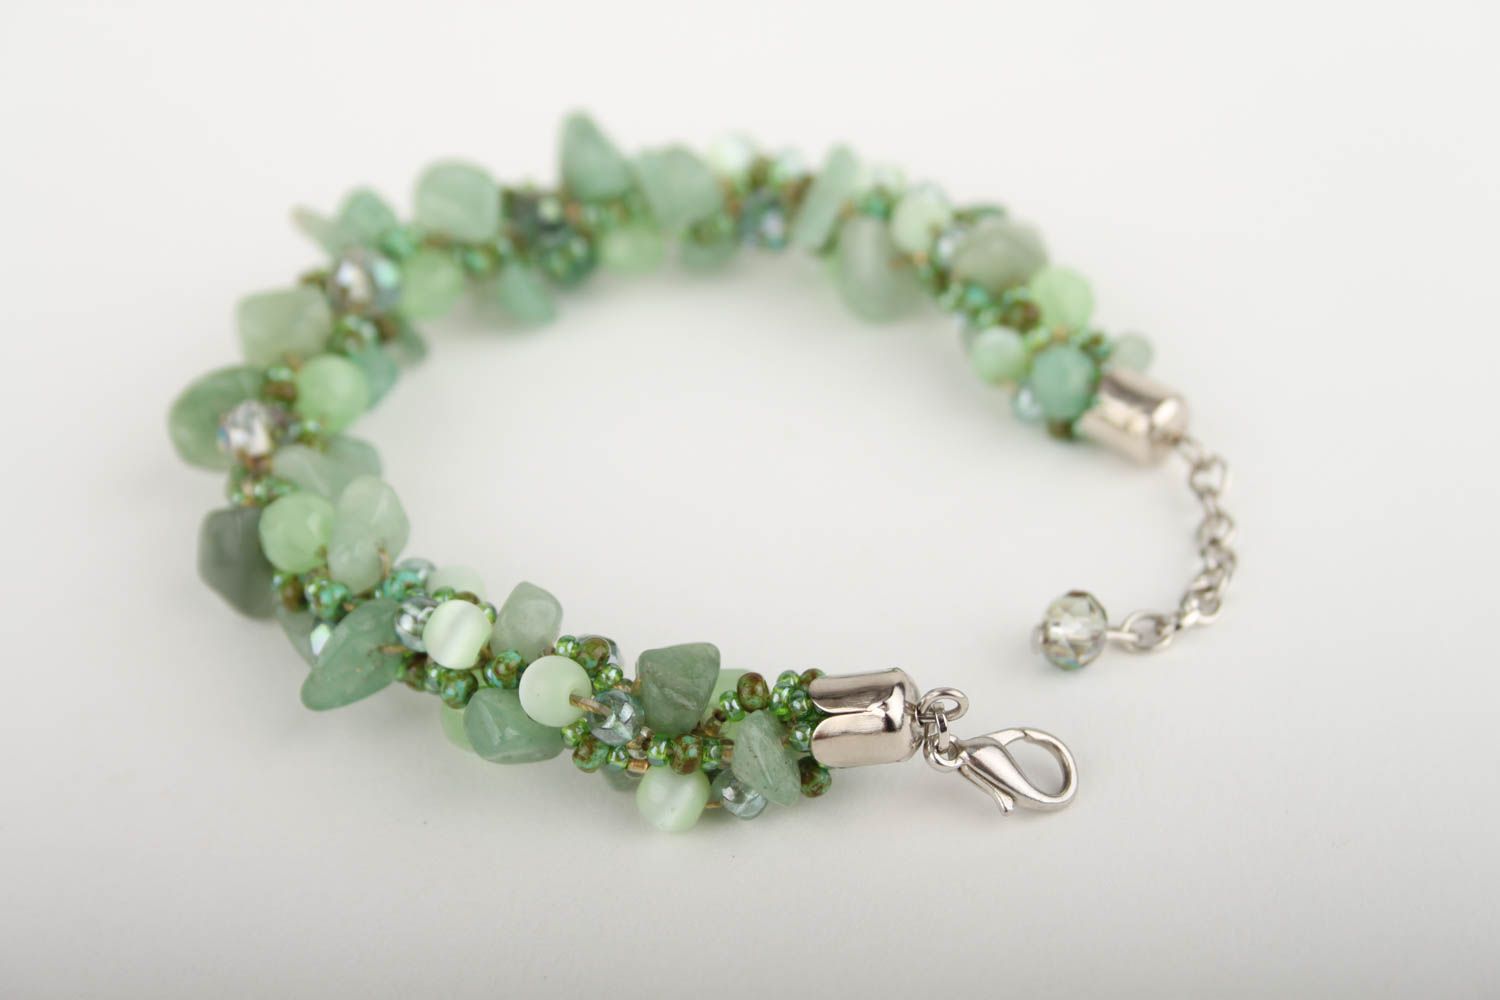 Handmade bracelet with natural stones nephritis bracelet fashion jewelry for her photo 4